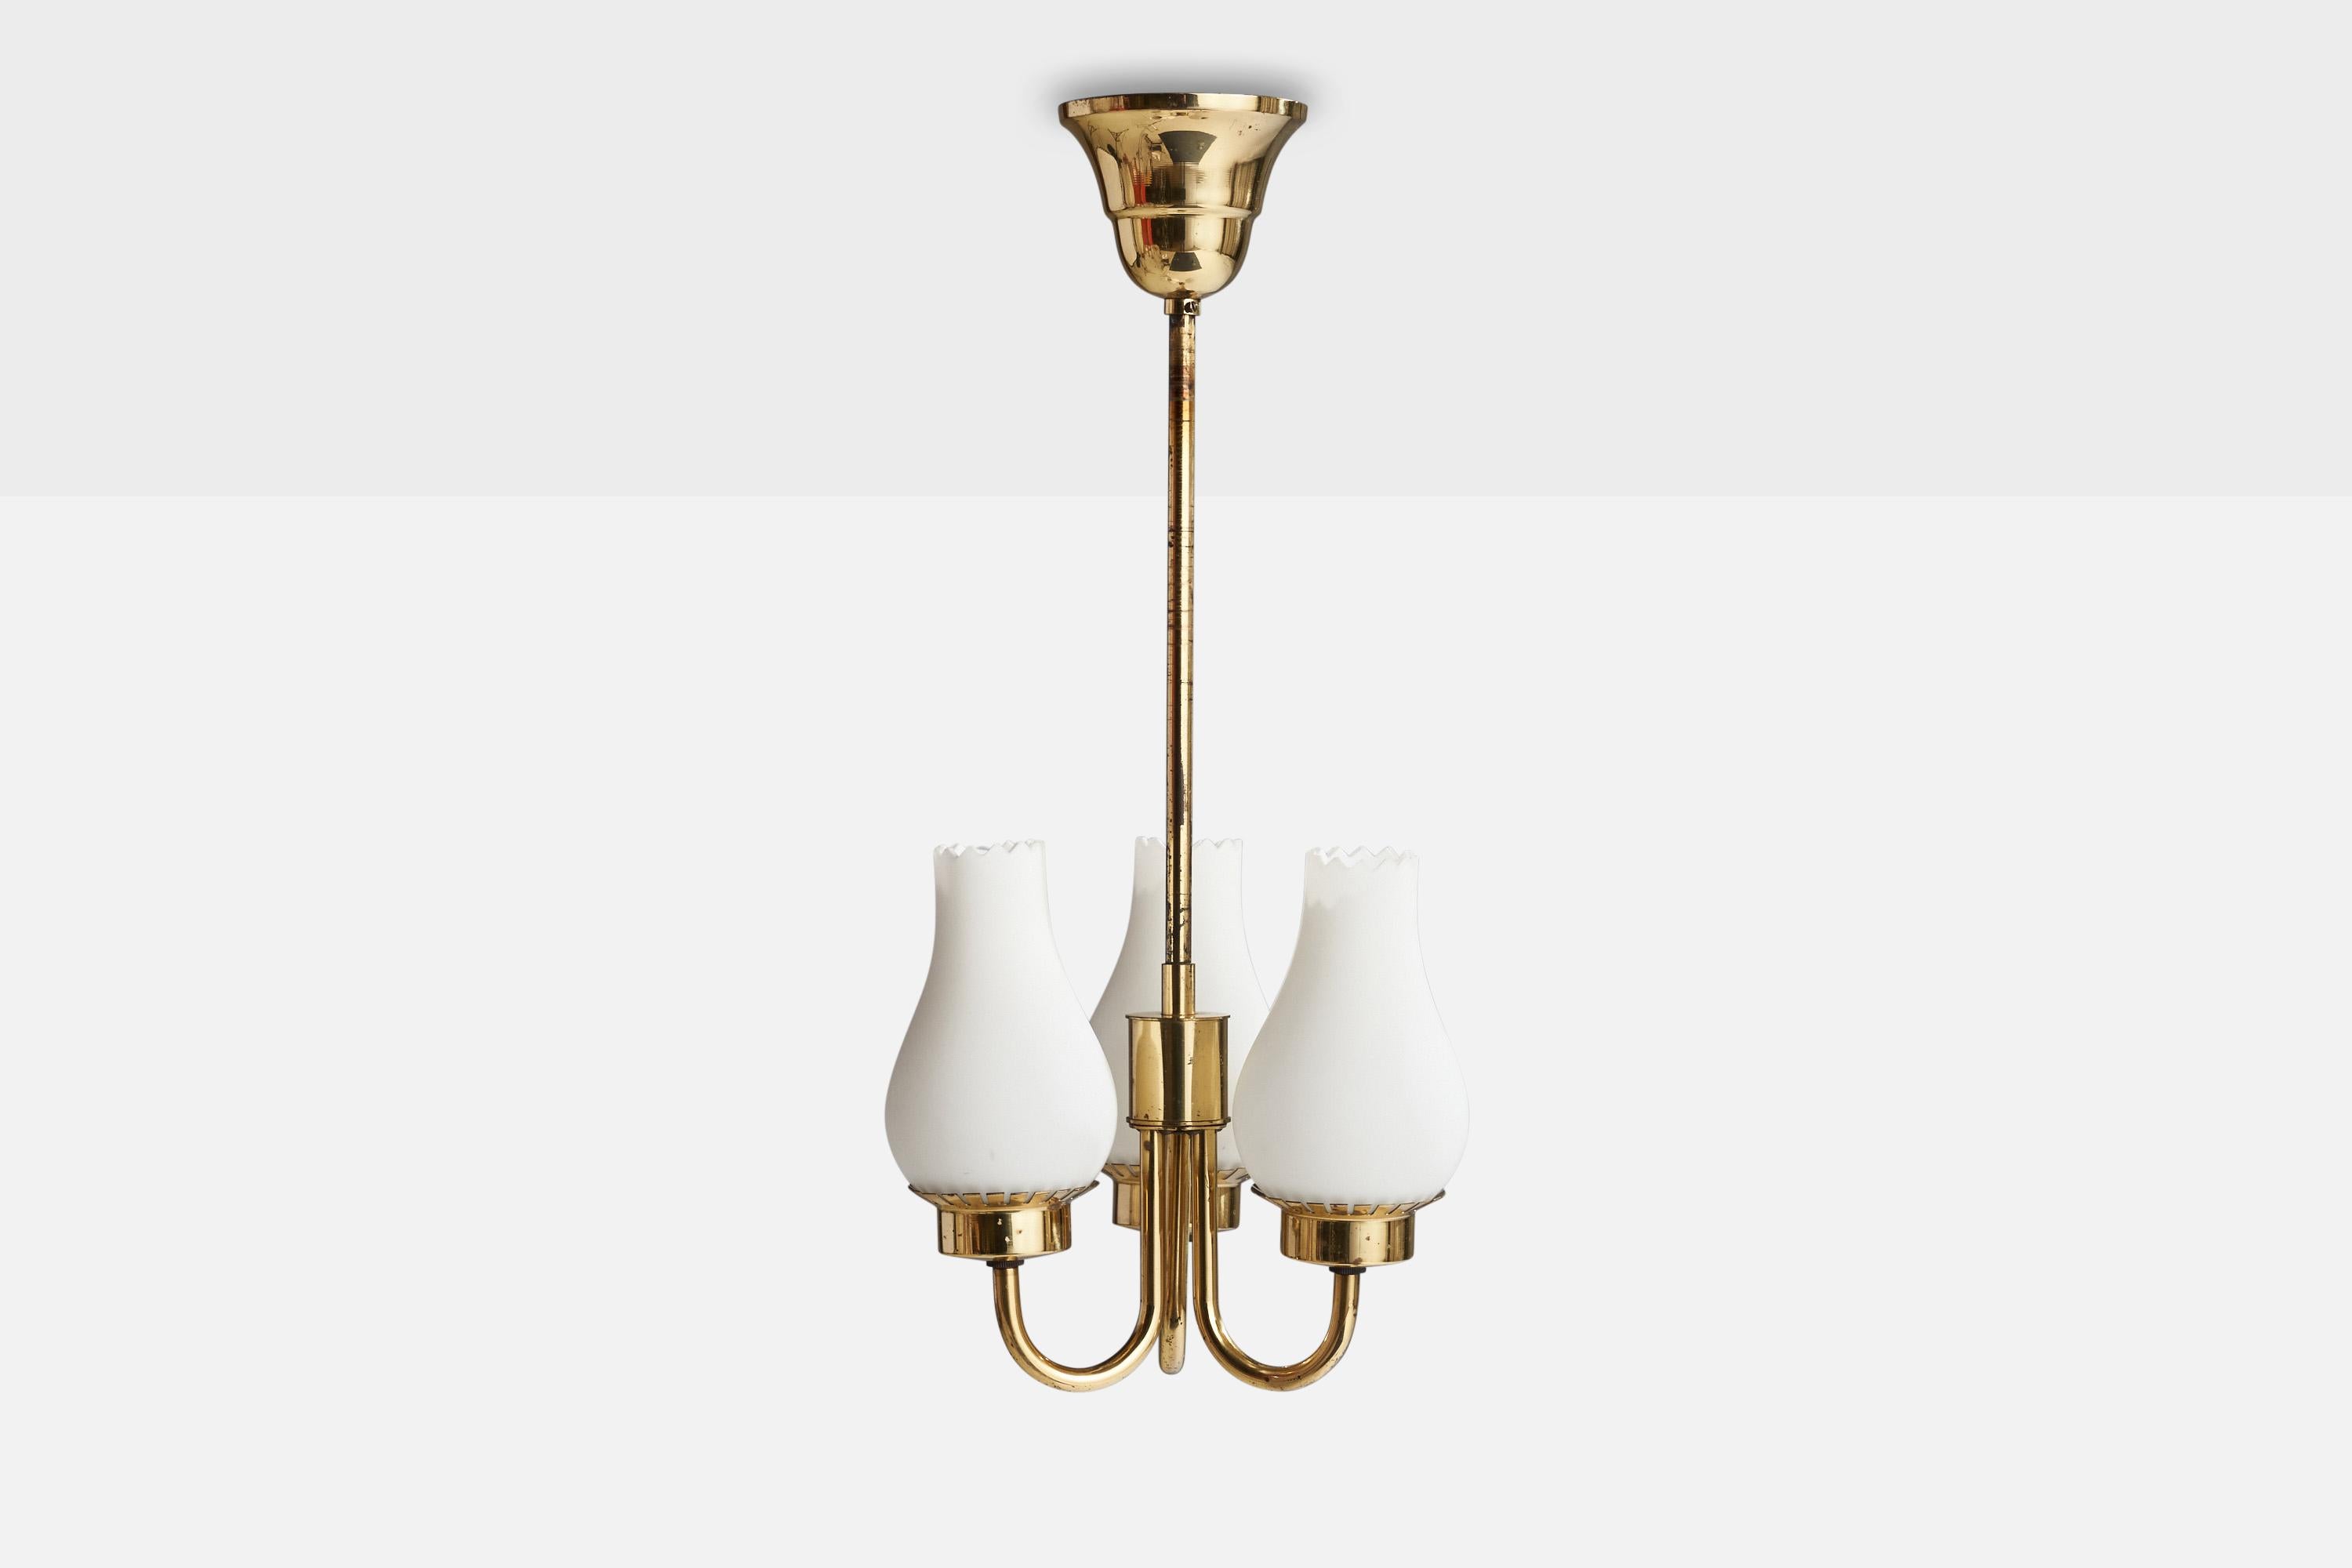 A brass and opaline glass chandelier designed and produced in Sweden, c. 1940s.

Dimensions of canopy (inches): 3.25” H x 3.75”  Diameter
Socket takes standard E-14 bulbs. 3 sockets.There is no maximum wattage stated on the fixture. All lighting